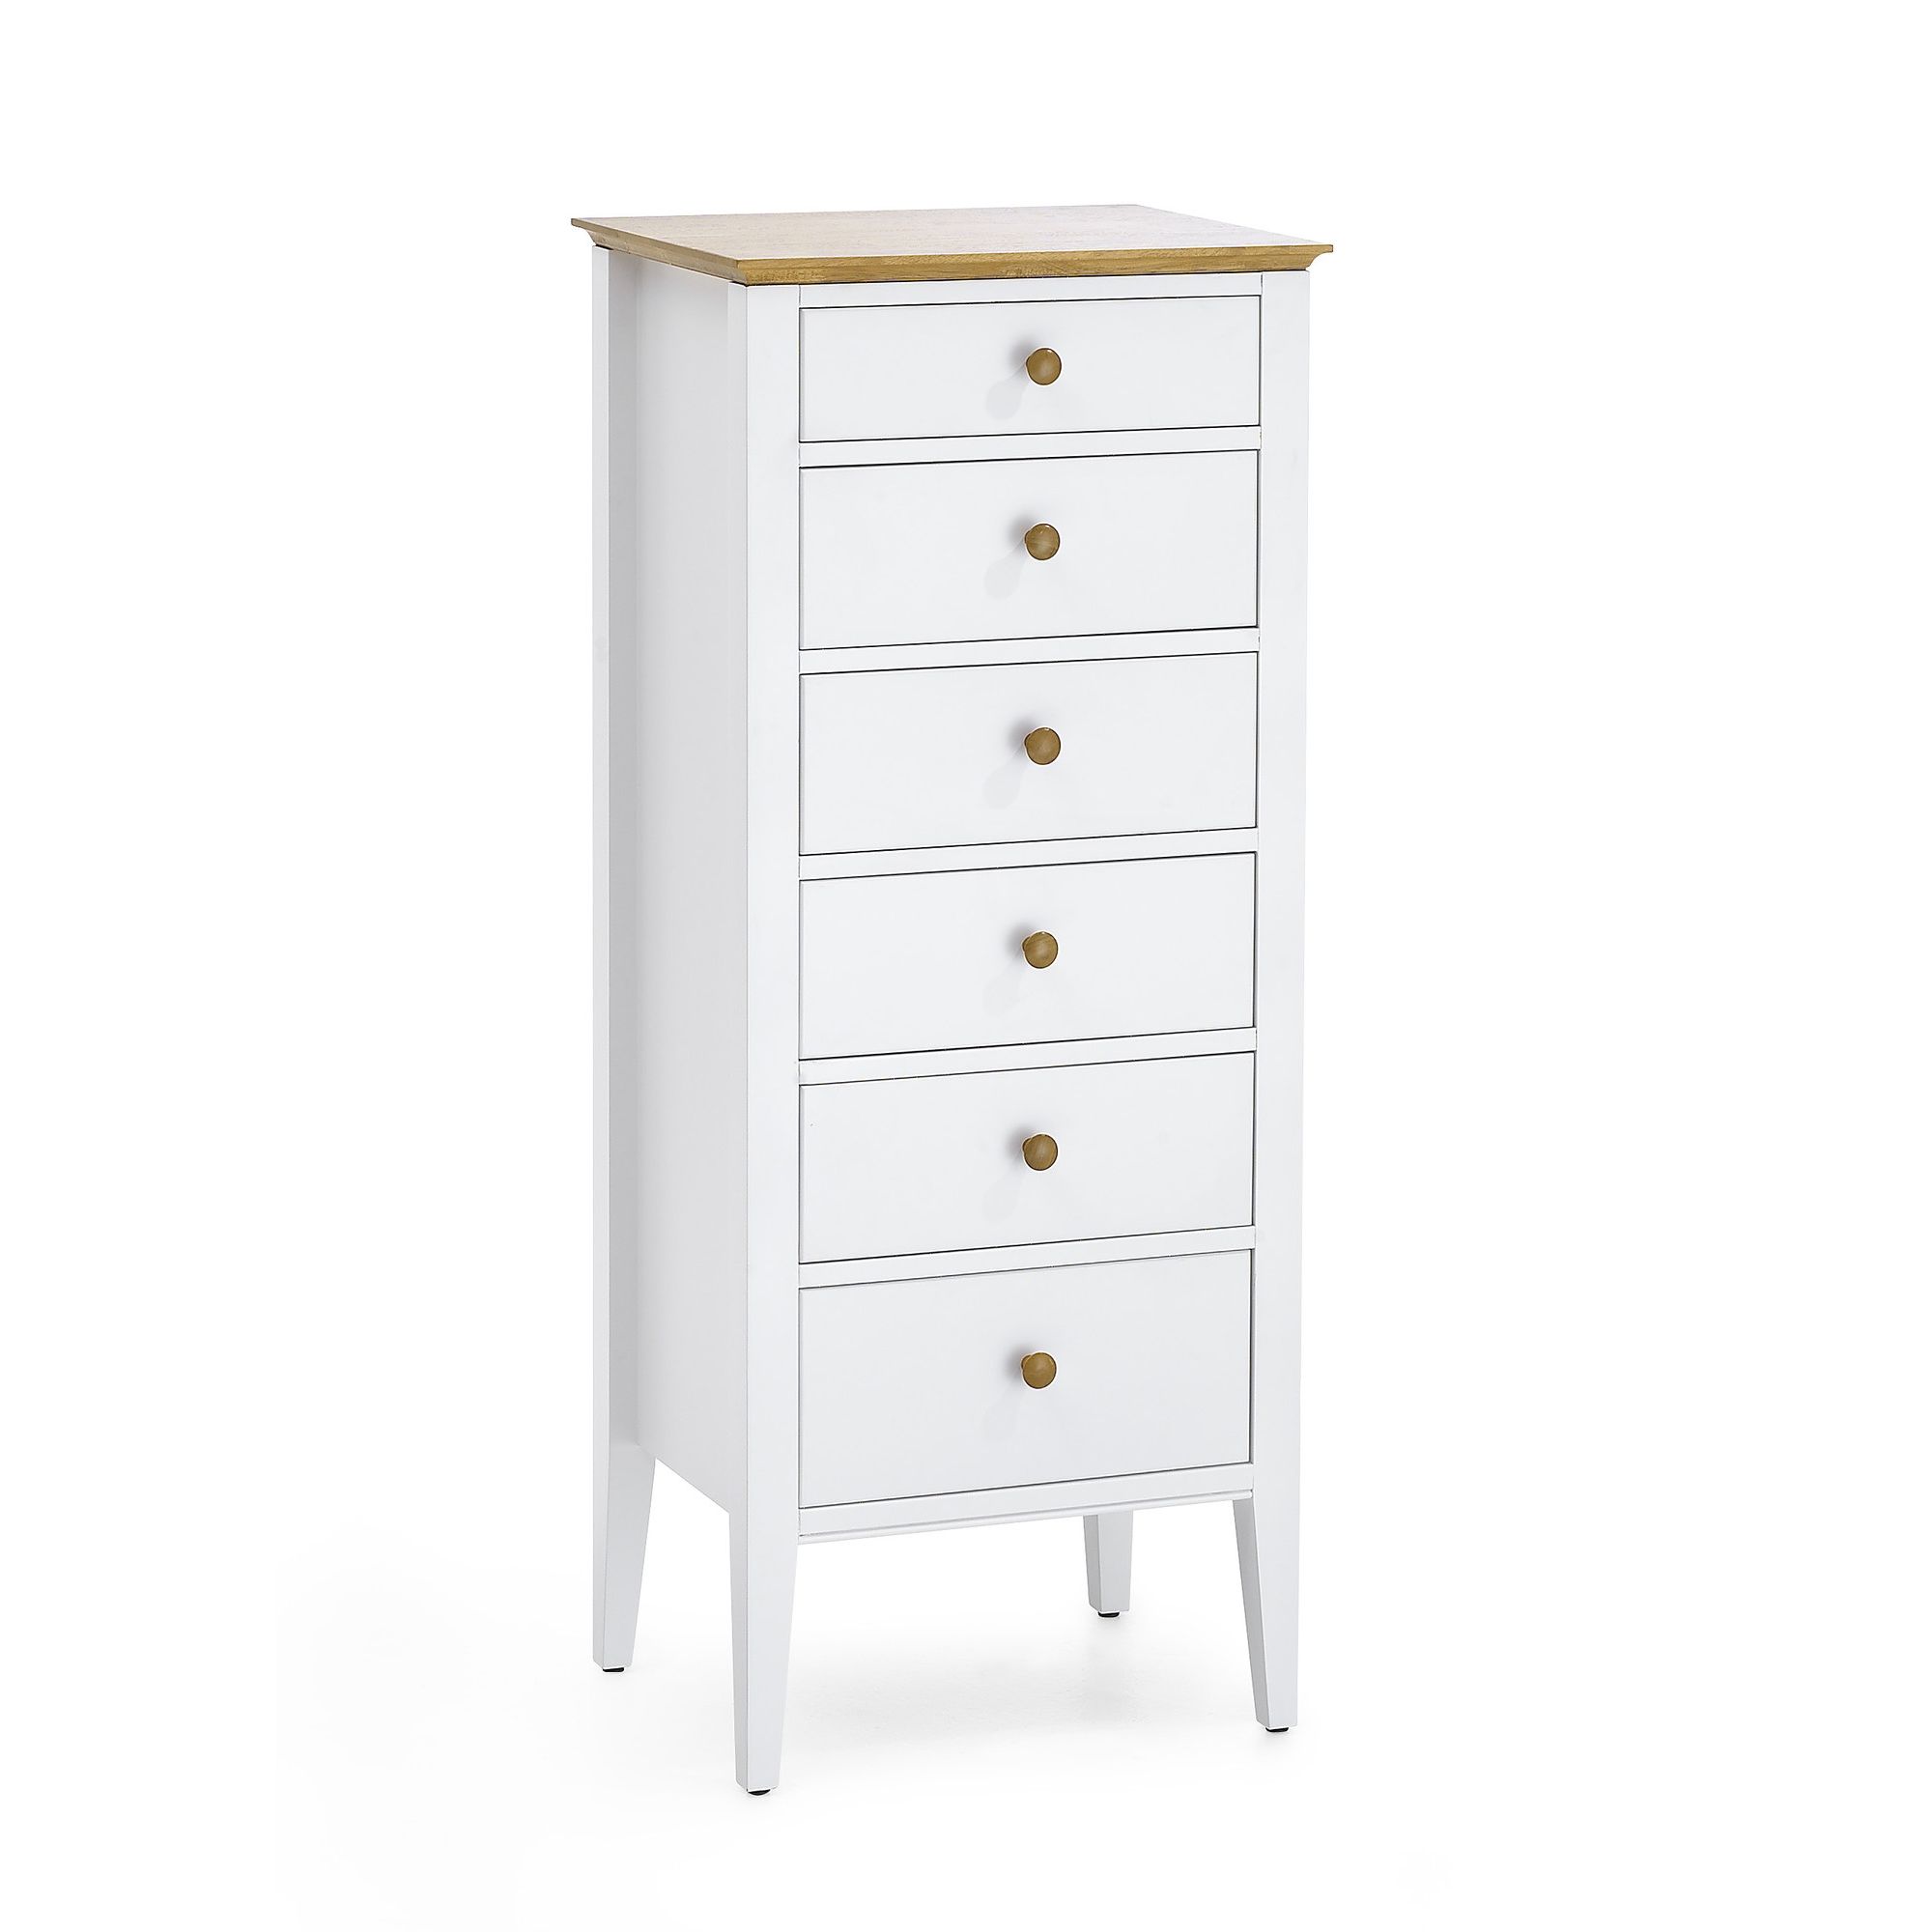 Serene Furnishings Grace 6 Drawer Wellington Tallboy Chest - Golden Cherry with Opal White at Tescos Direct